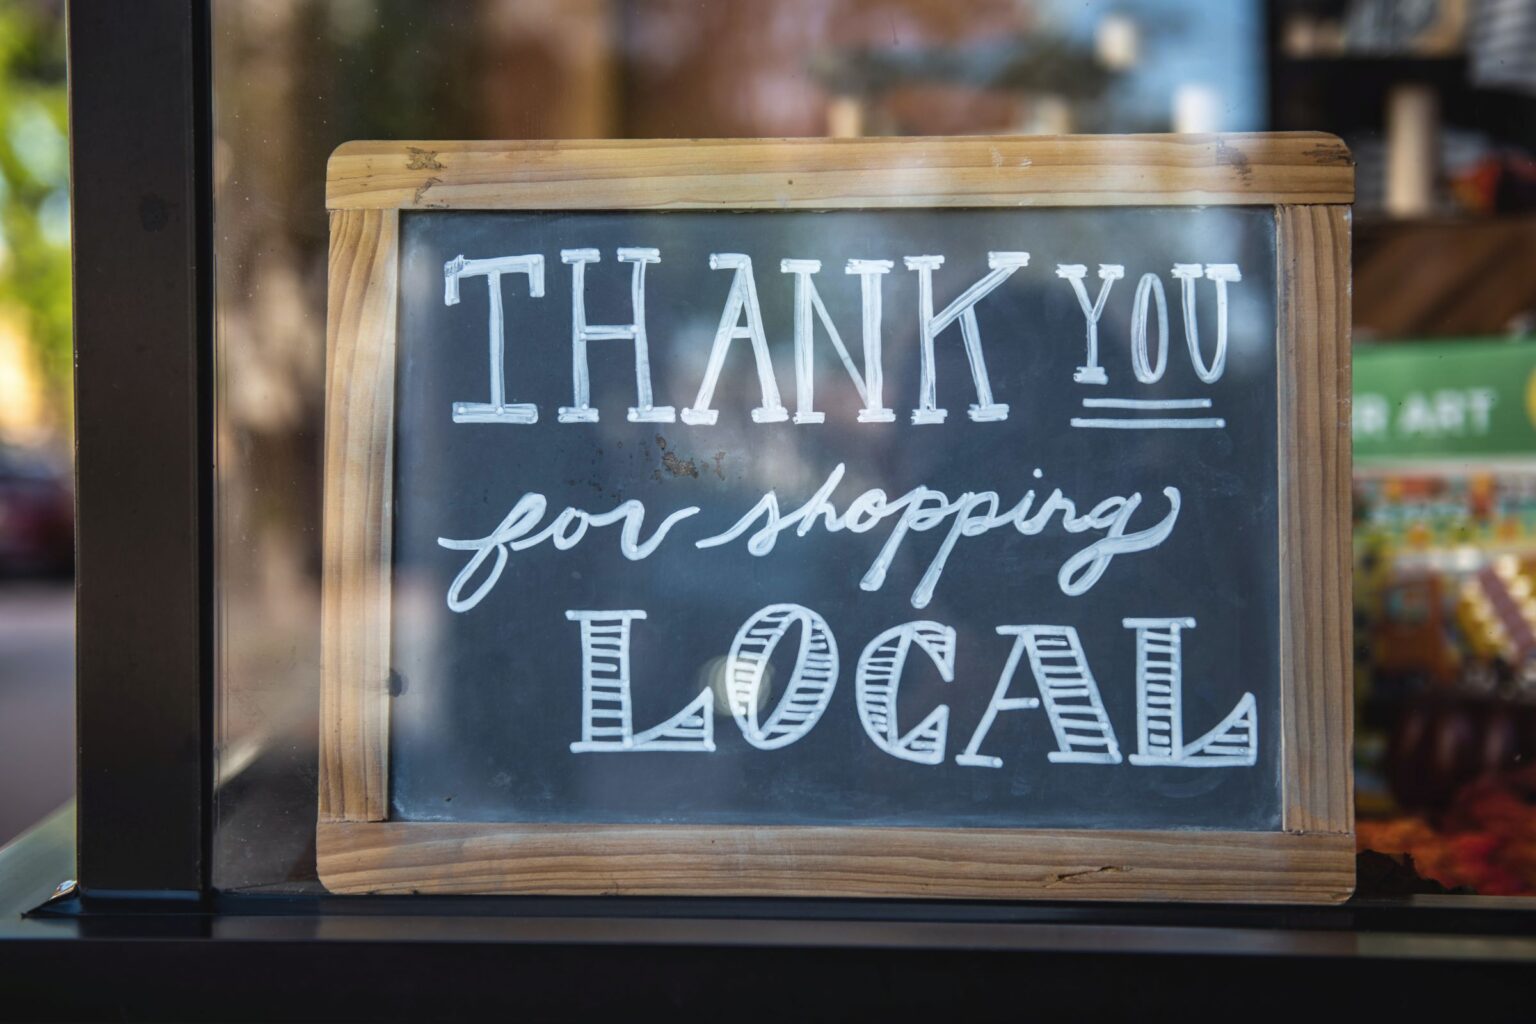 Quarantine is hitting us all hard. Many local restaurants are hurting right now with their doors shut. Here's how you can support local restaurants.